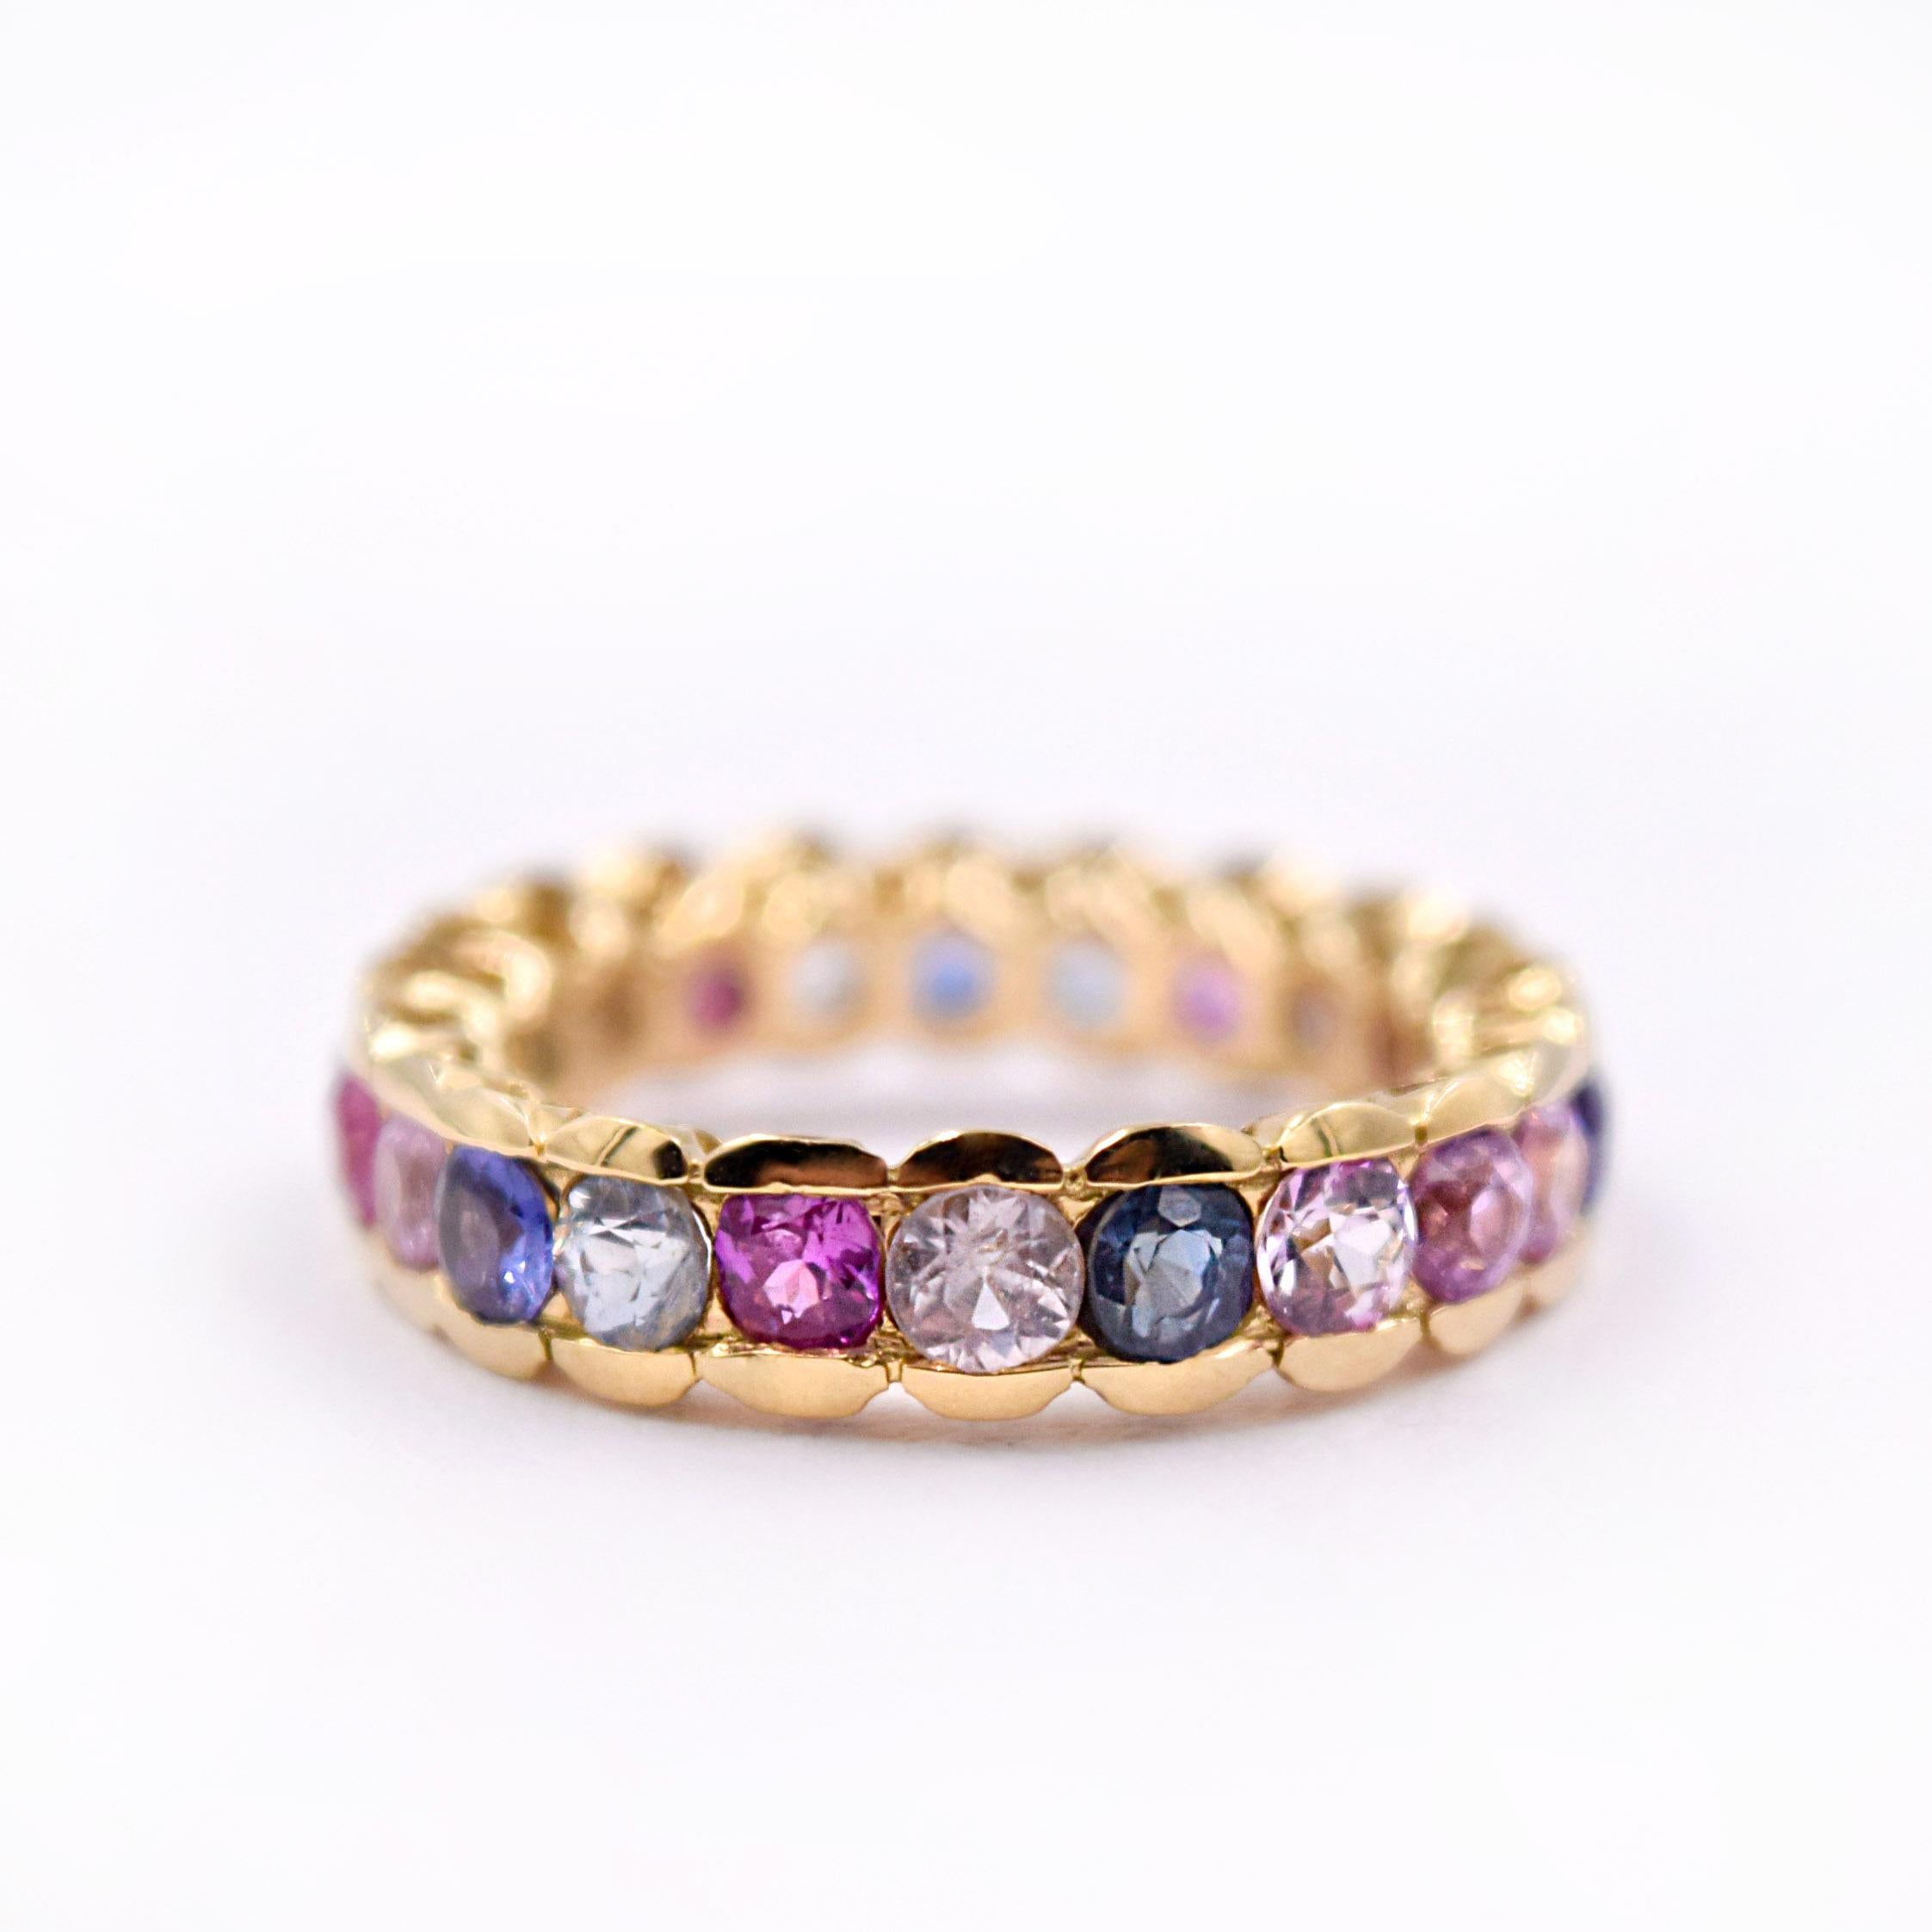 - Untreated fancy colored rubies and sapphires are set in a half-bezel setting
- Metal of the ring is made with 20 Karat Yellow Gold 
- Stunning color with rare unheated gemstones.
- Ring size is 5.75